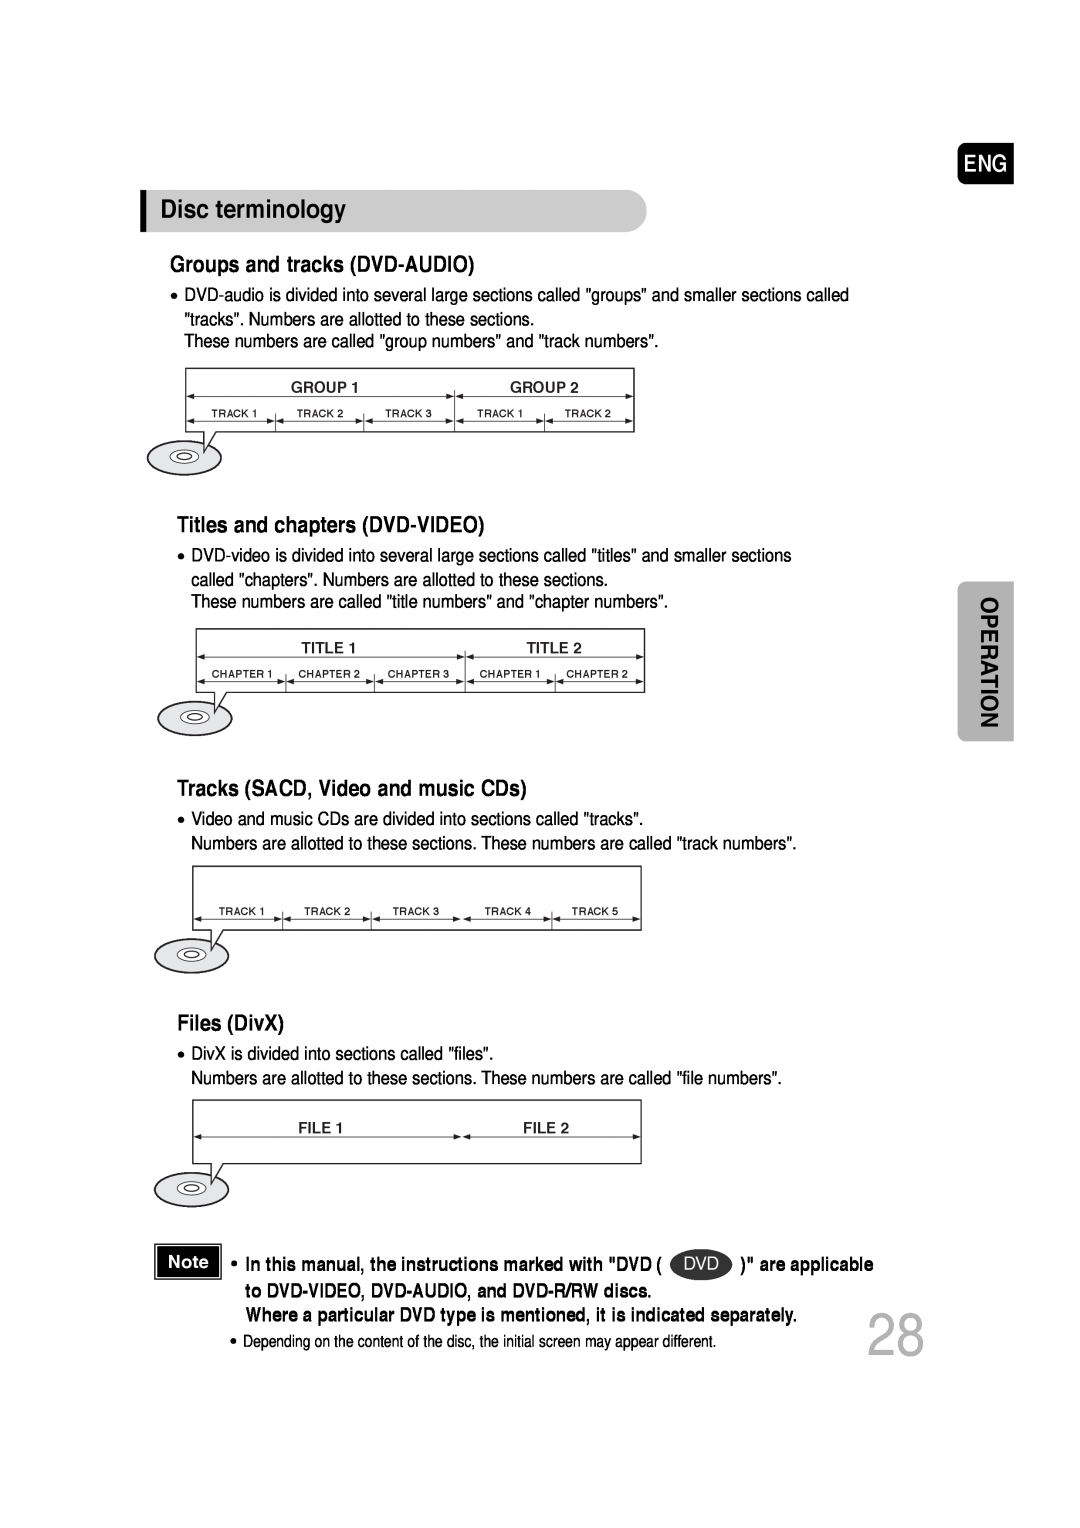 Samsung AH68-01720S Disc terminology, Groups and tracks DVD-AUDIO, Titles and chapters DVD-VIDEO, Files DivX, Operation 